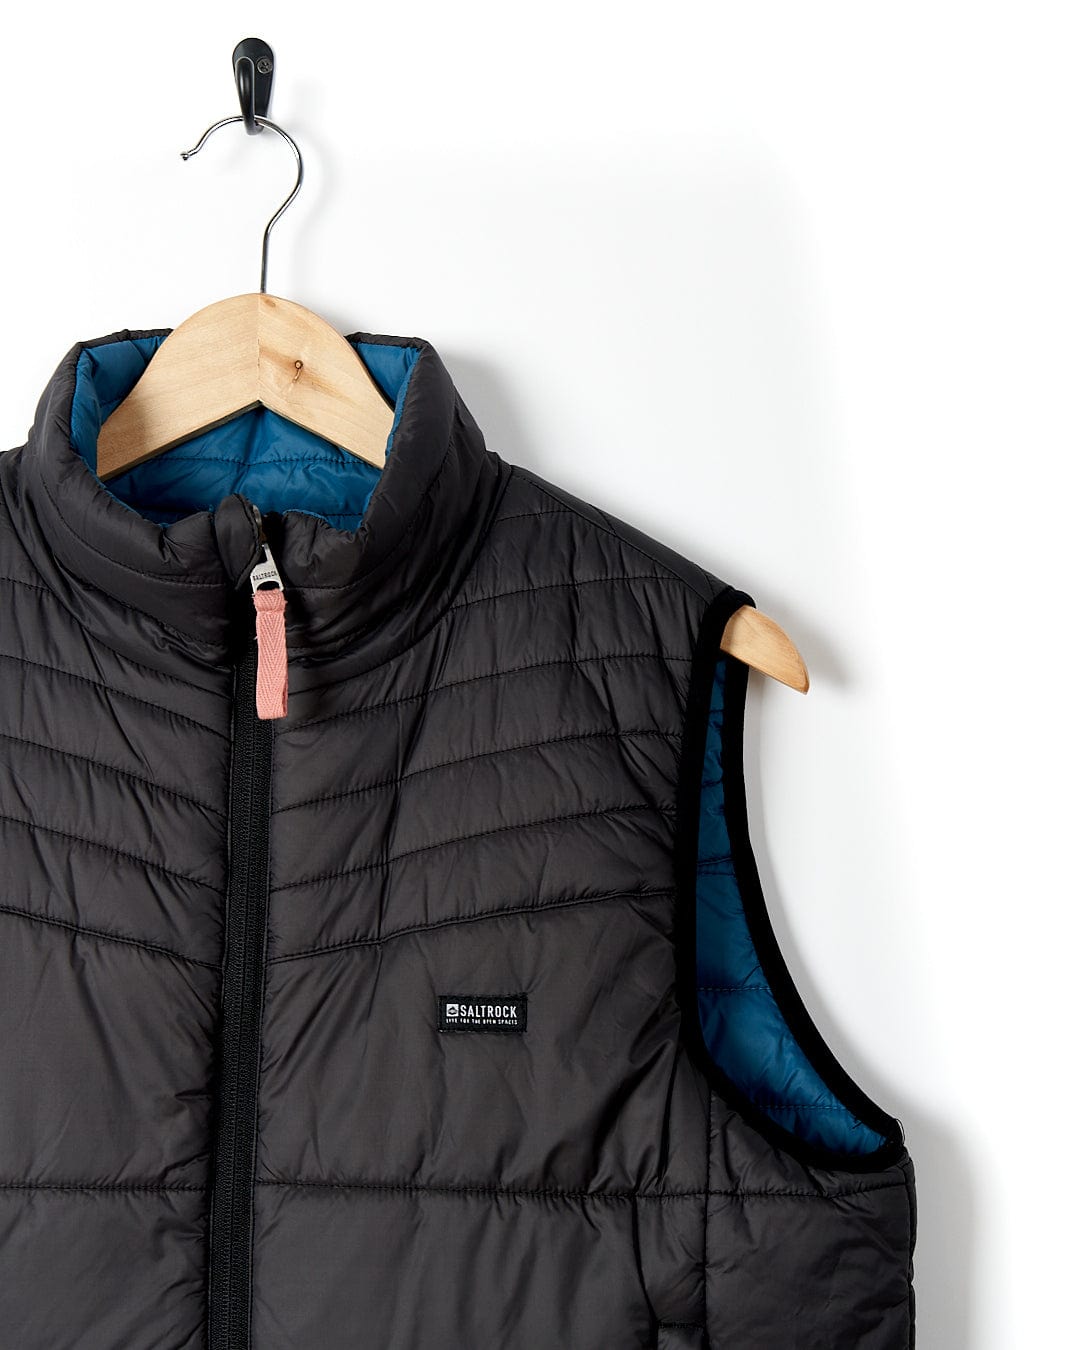 A water resistant Ridleys - Womens Reversible Gilet - Blue, the perfect travel buddy, hanging on a hanger. Brand Name: Saltrock